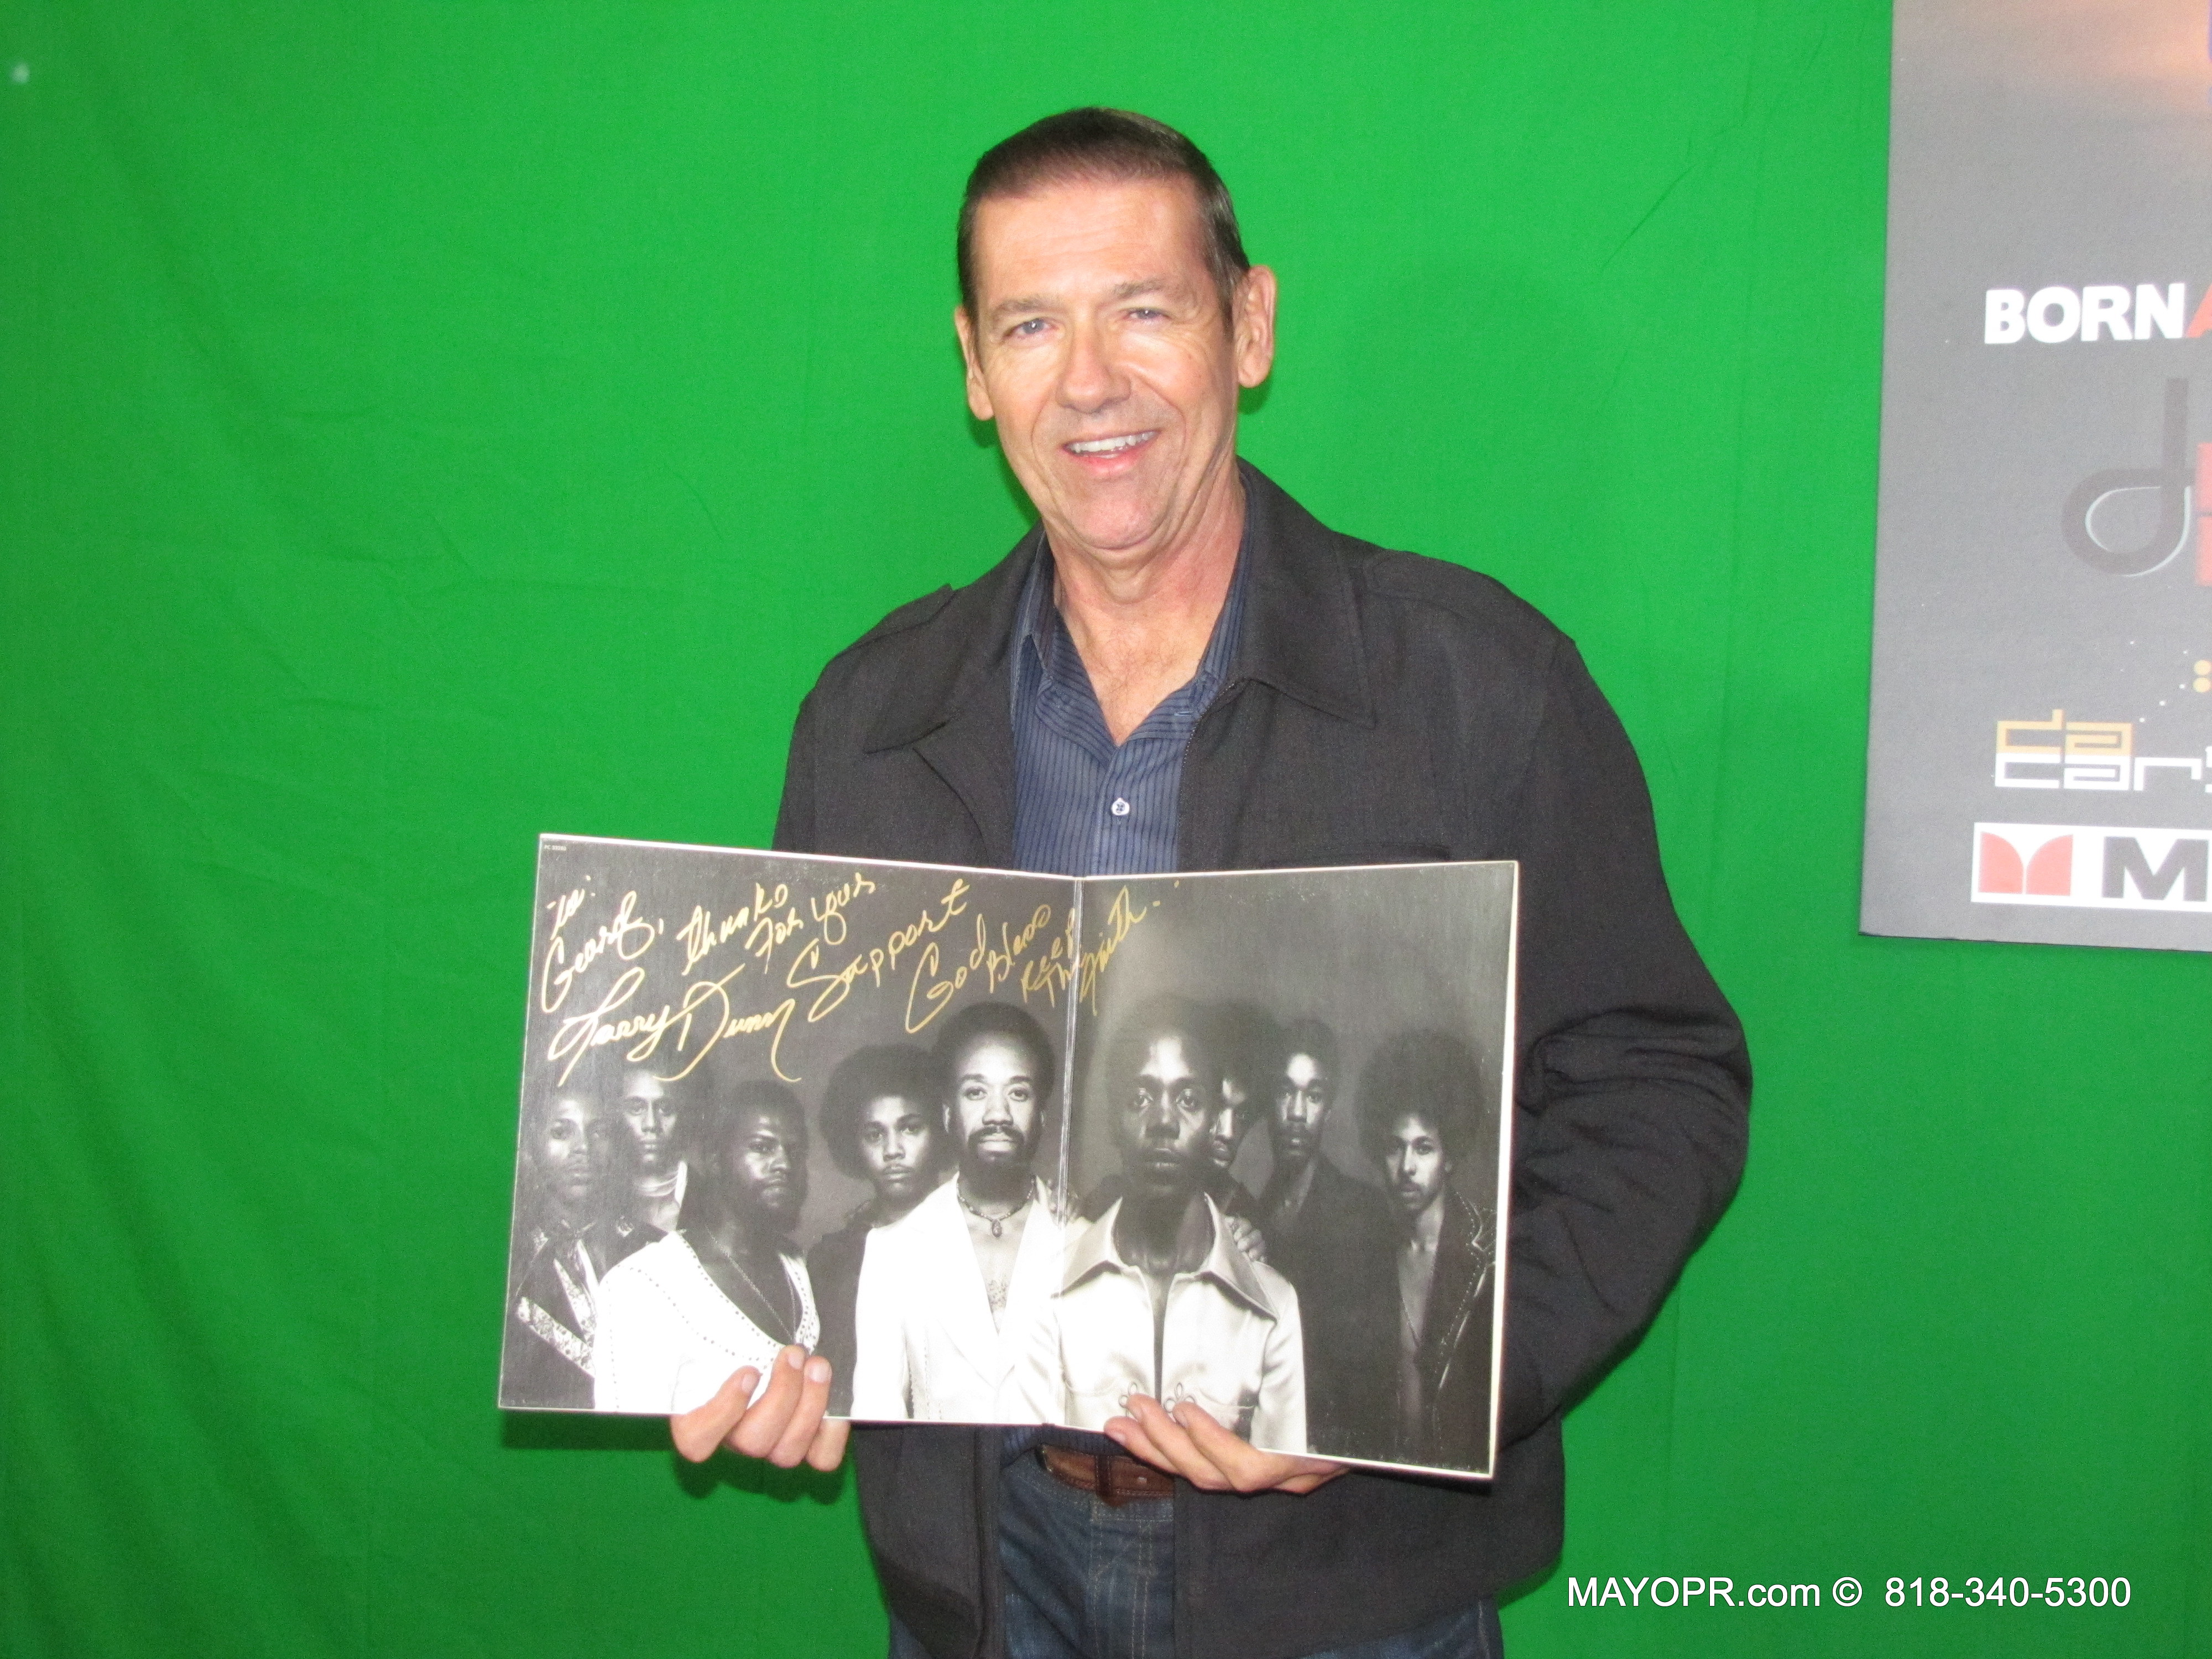 George S. McQuade III holds up his just autographed Earth, Wind & Fire Album with EWF's former keyboardist Larry Dunn,who performed with Jon Barnes, Theresa King, Luis Montilla, Carlos Sanchez and other Jazz Giants at the Catalina Jazz Club